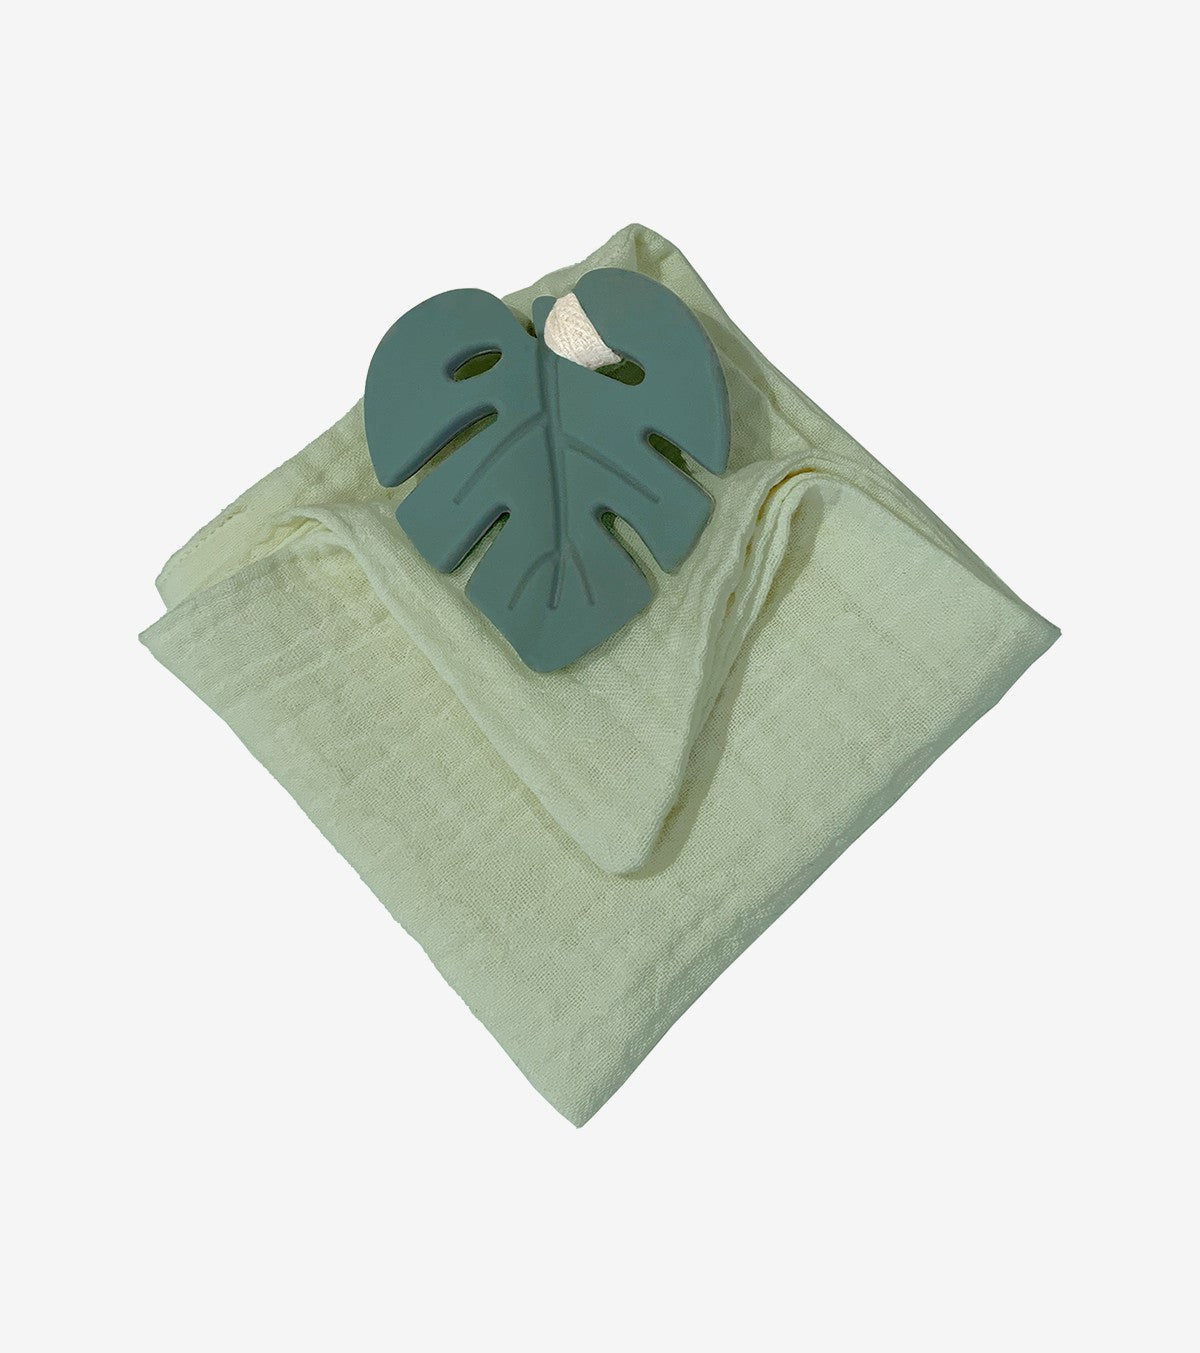 Green leaf teething ring with diaper